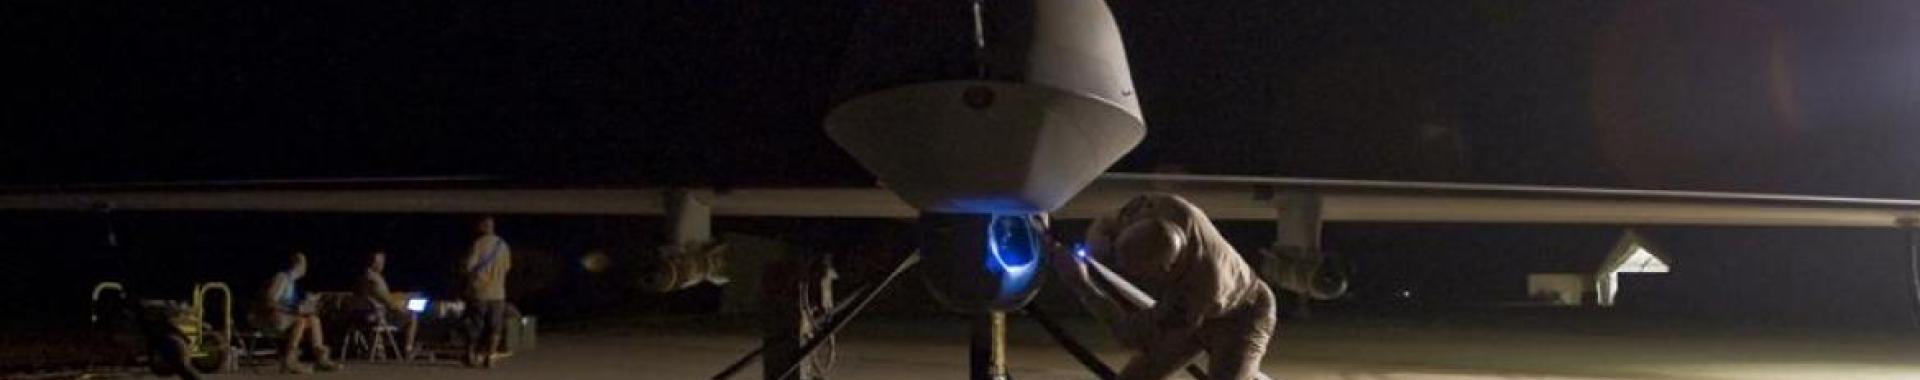 Military drone on the ground being serviced at night.